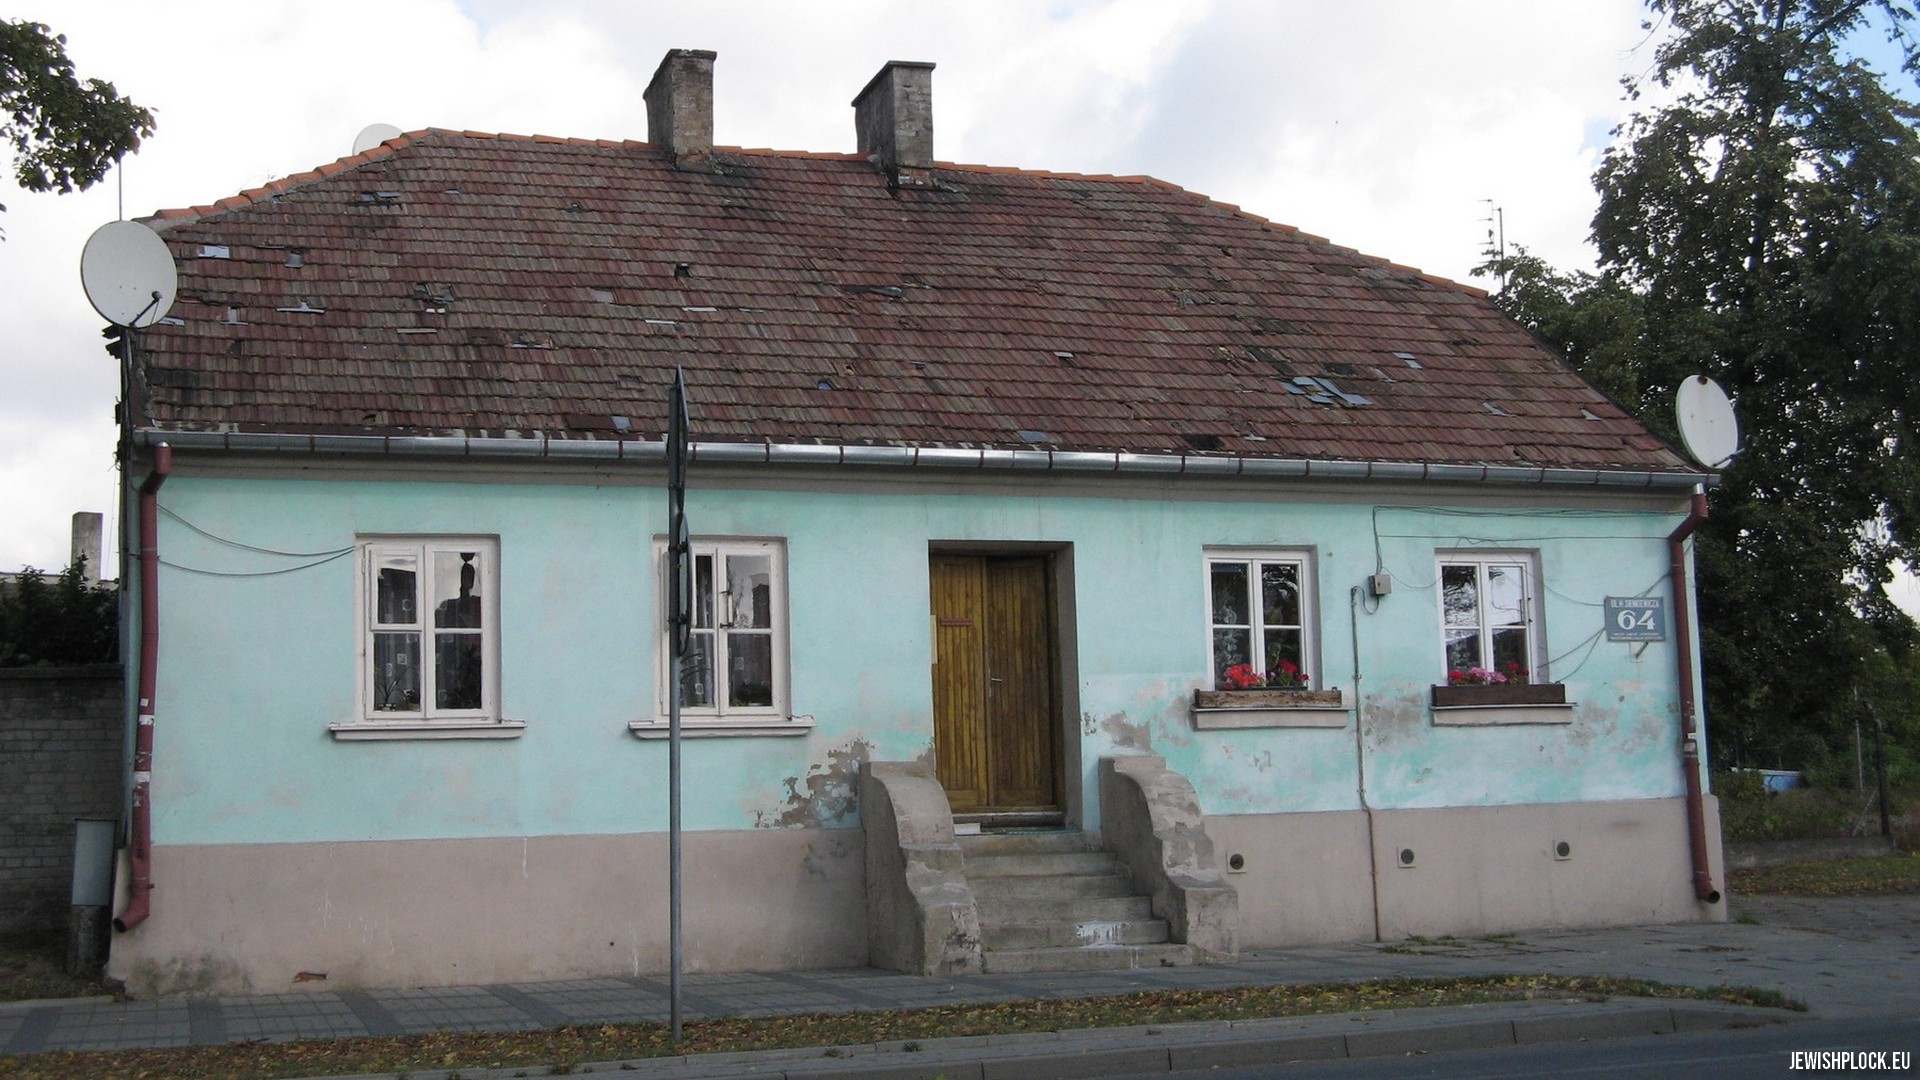 The walls of this small building witnessed great love and paralyzing fear. The municipality of Płock must save it.